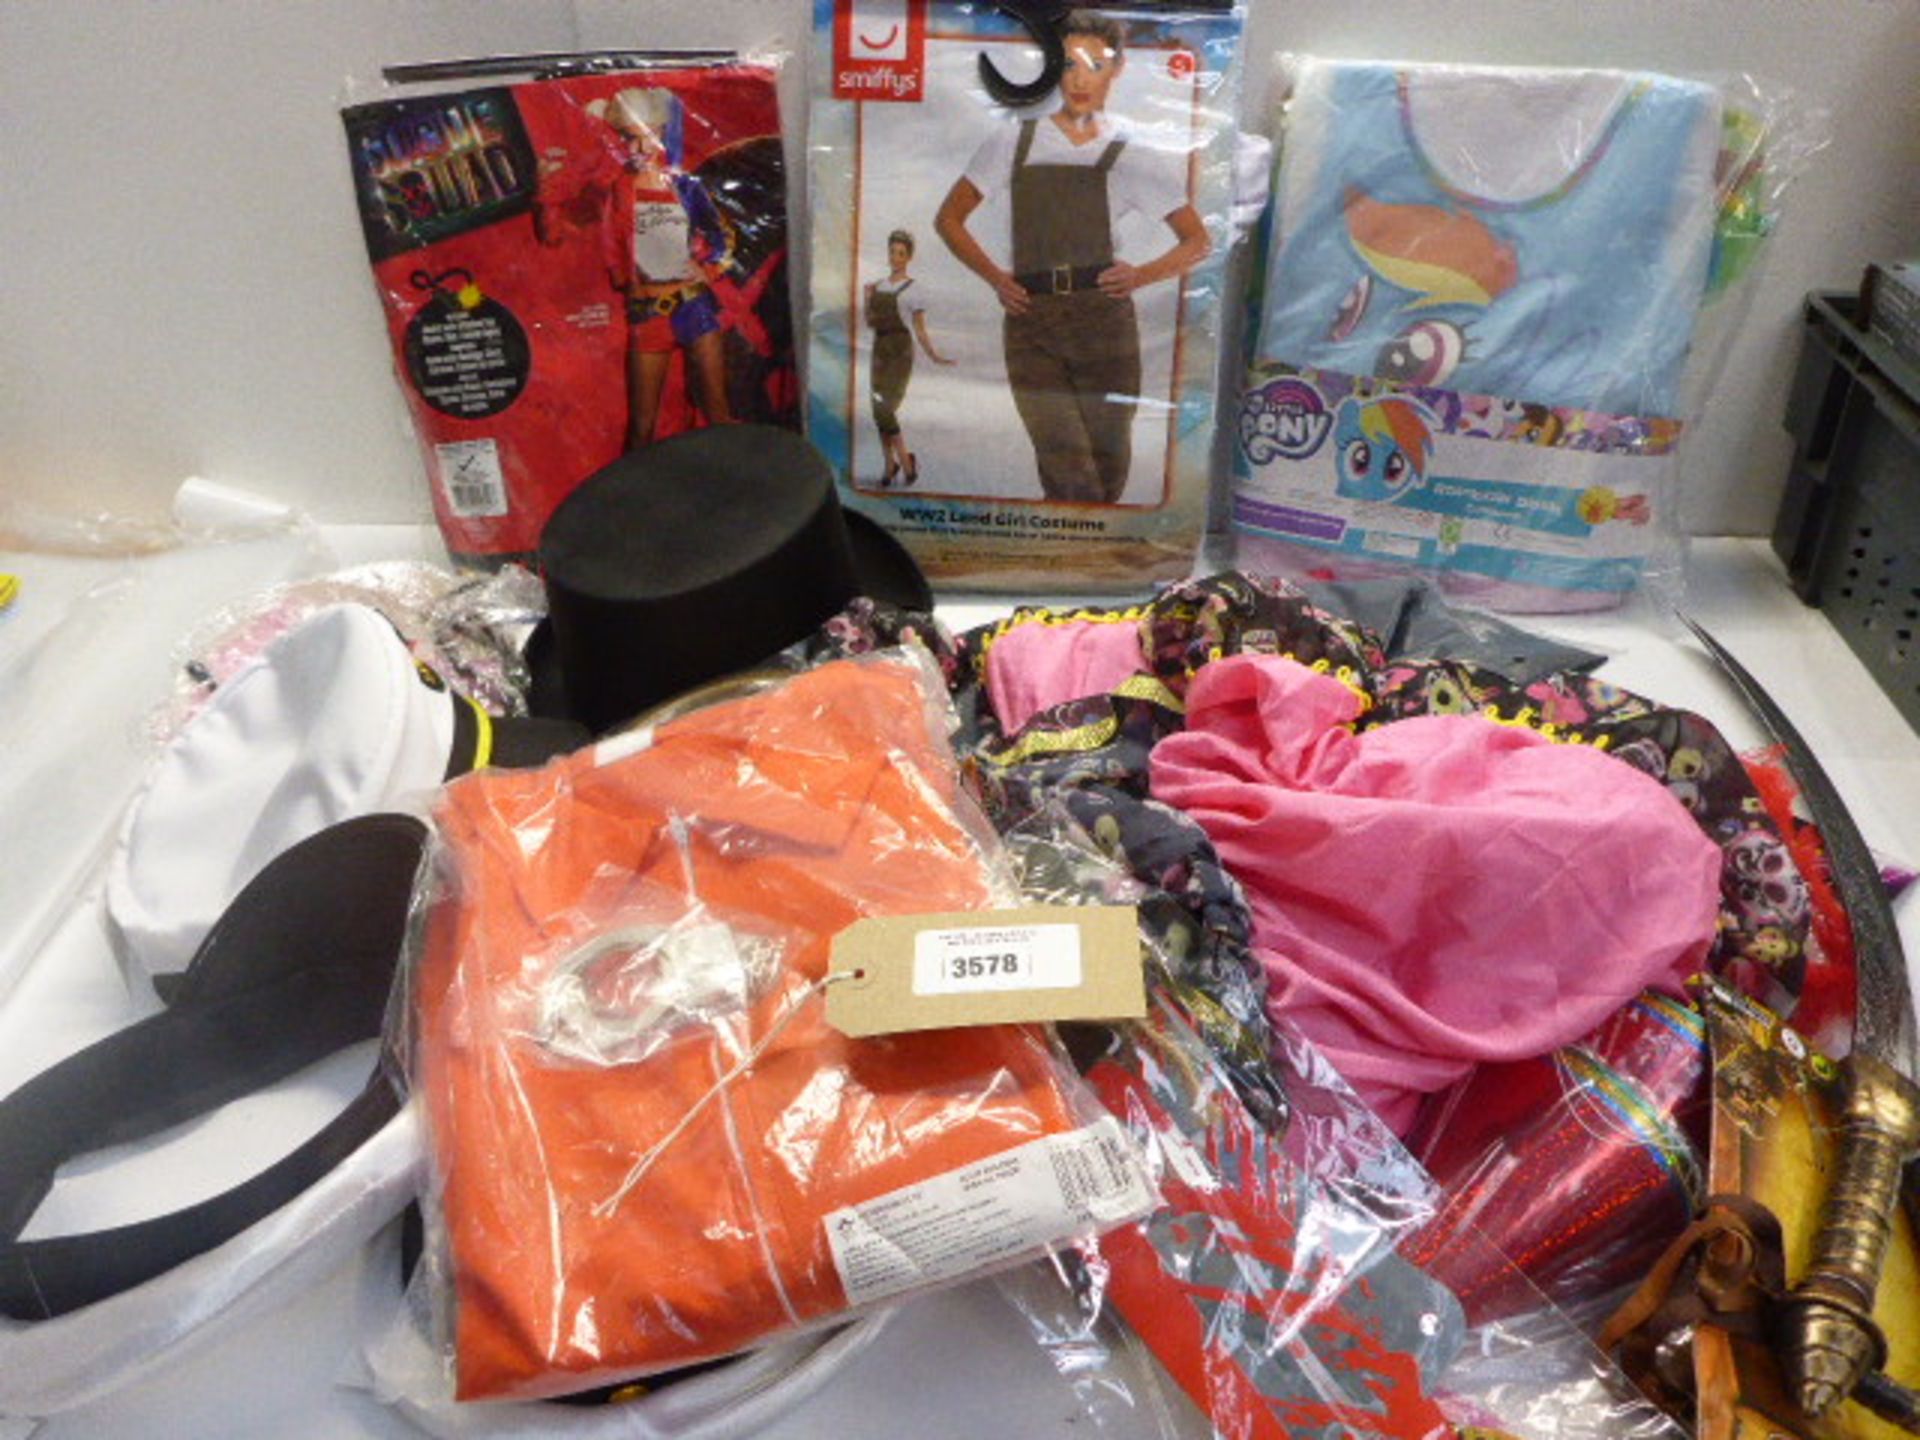 Fancy dress costumes, hats and accessories